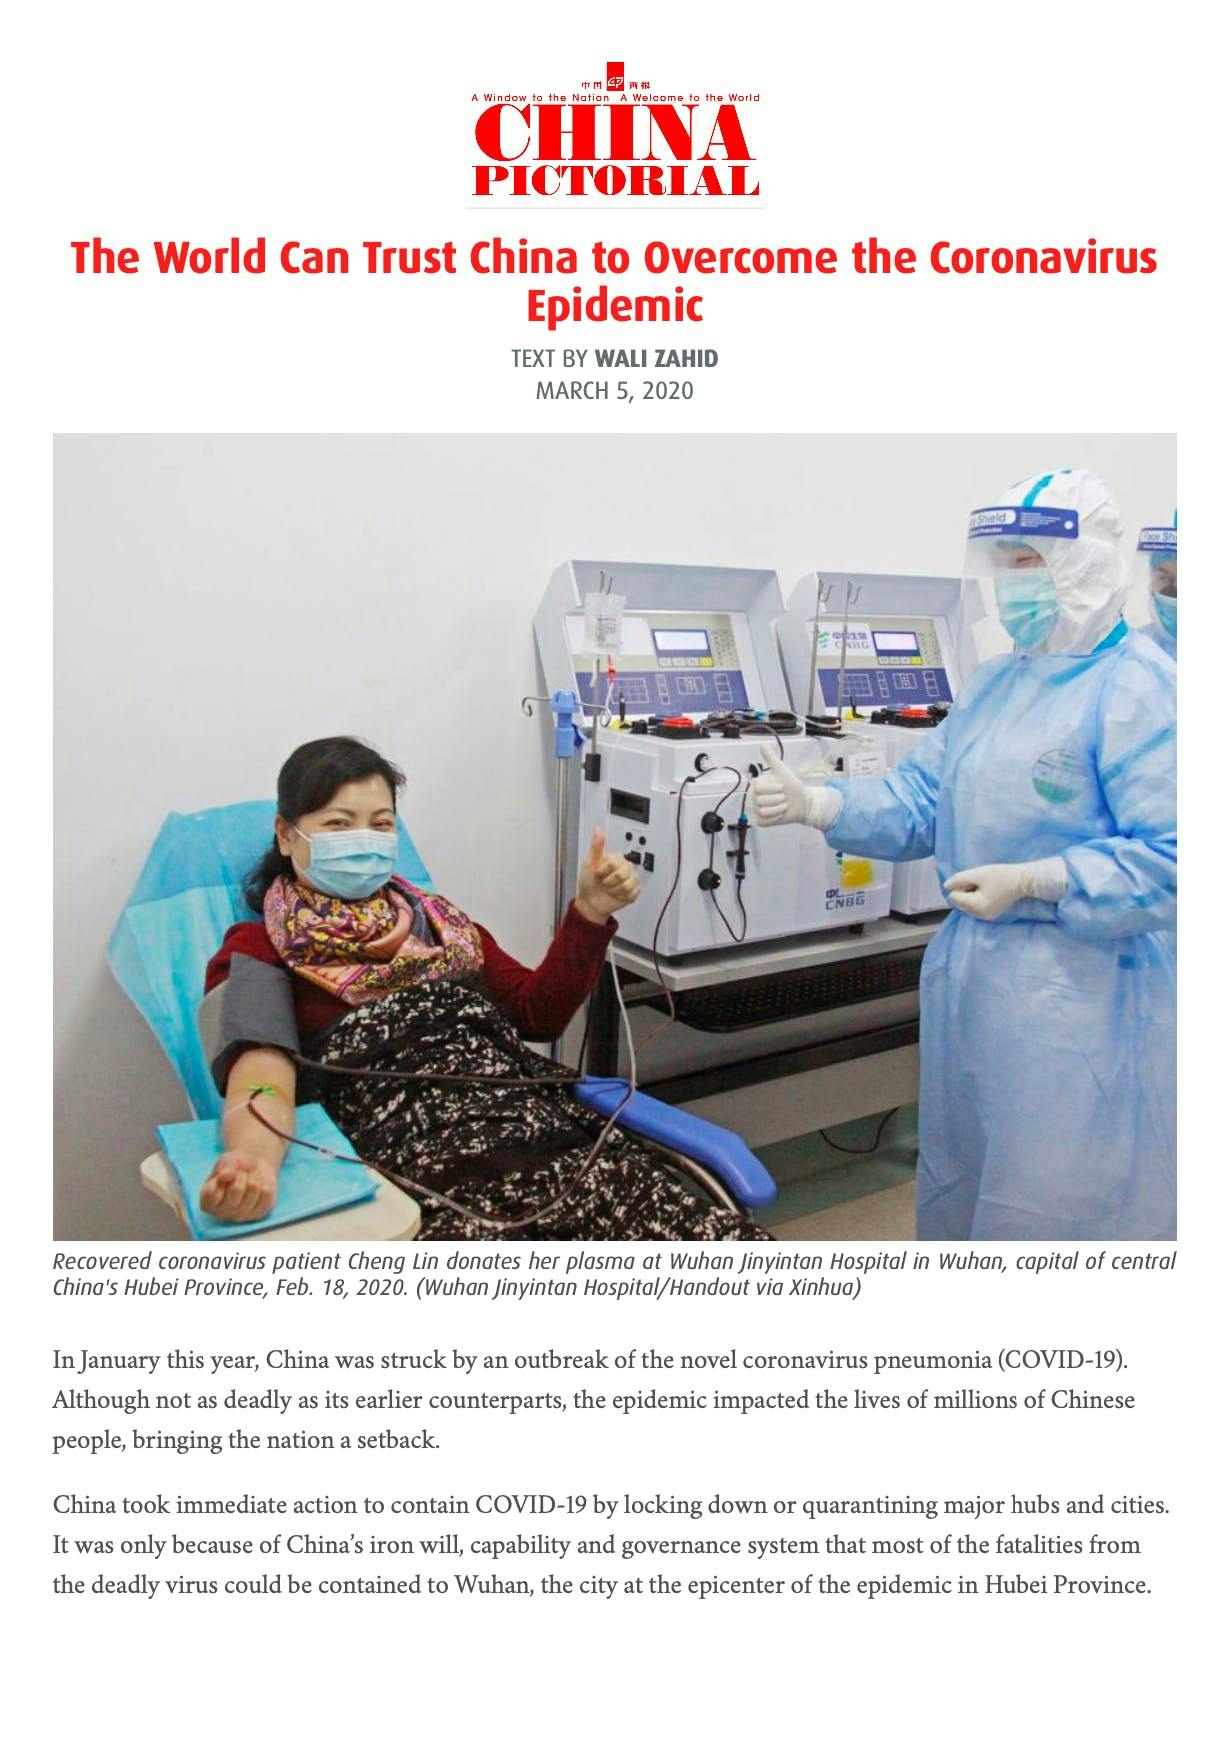 As early as February, Wali predicted why China could overcome COVID-19 epidemic